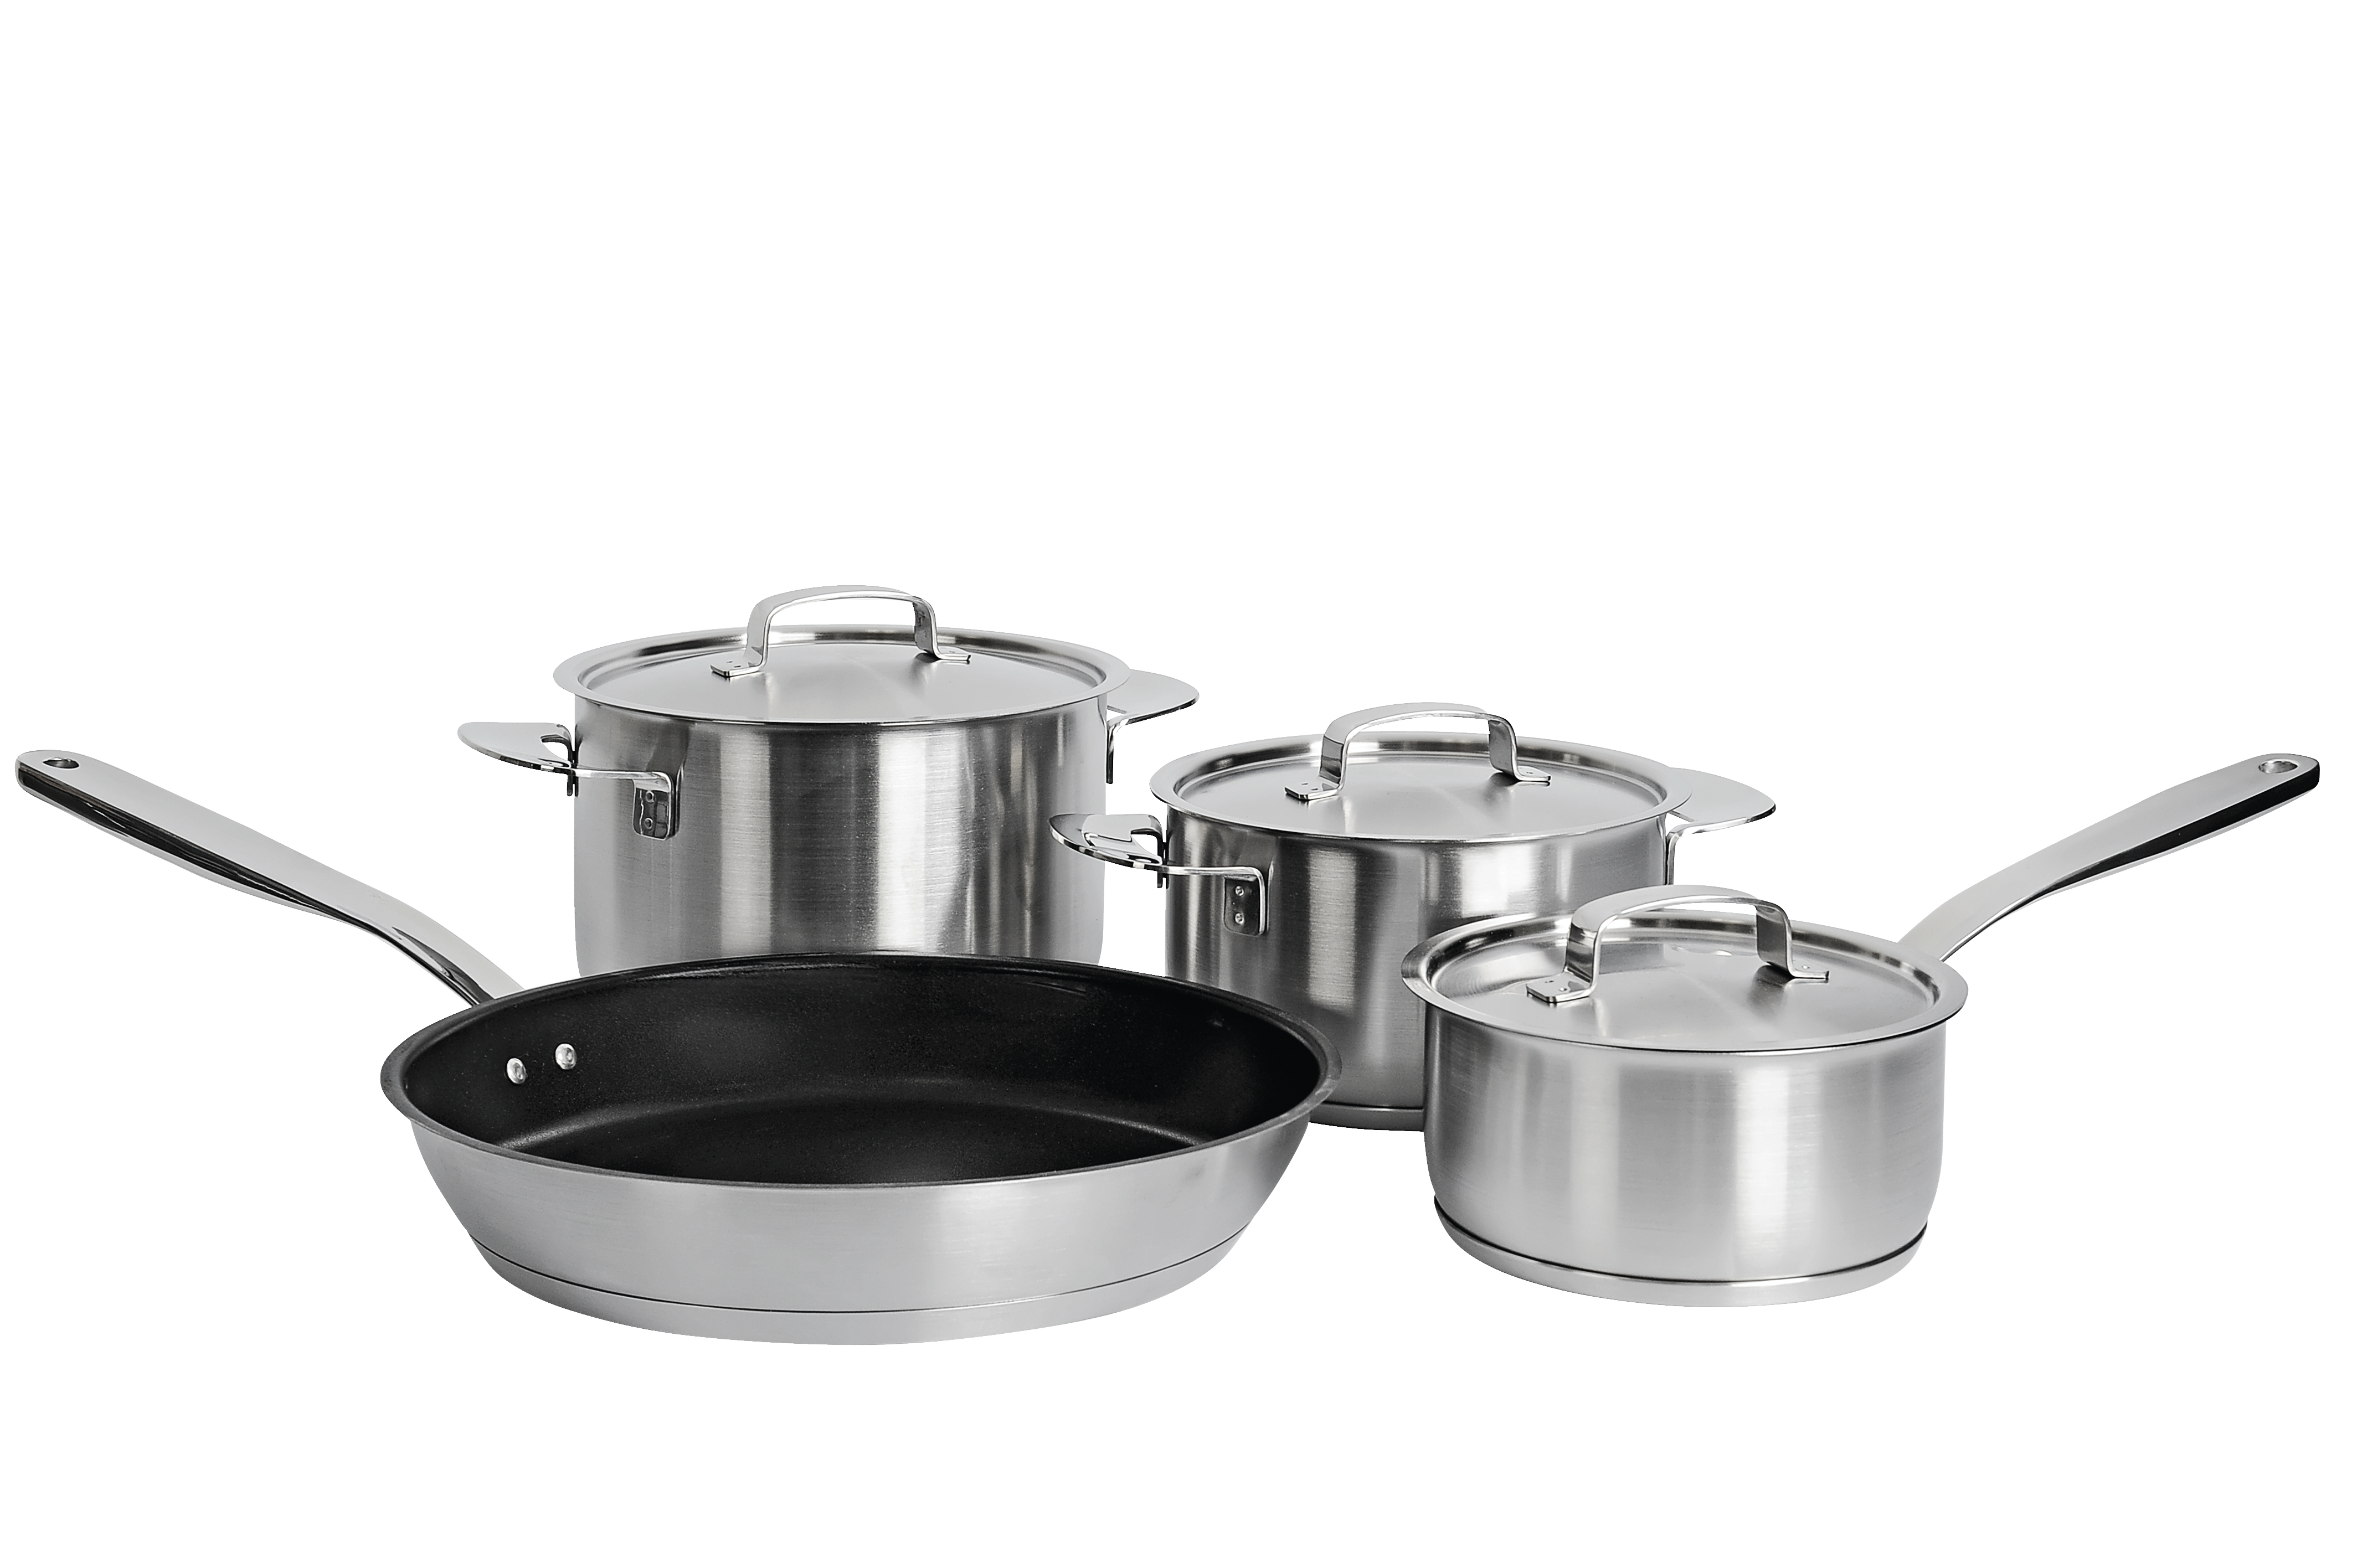 What are the Advantages of Using an Induction Cookware Set